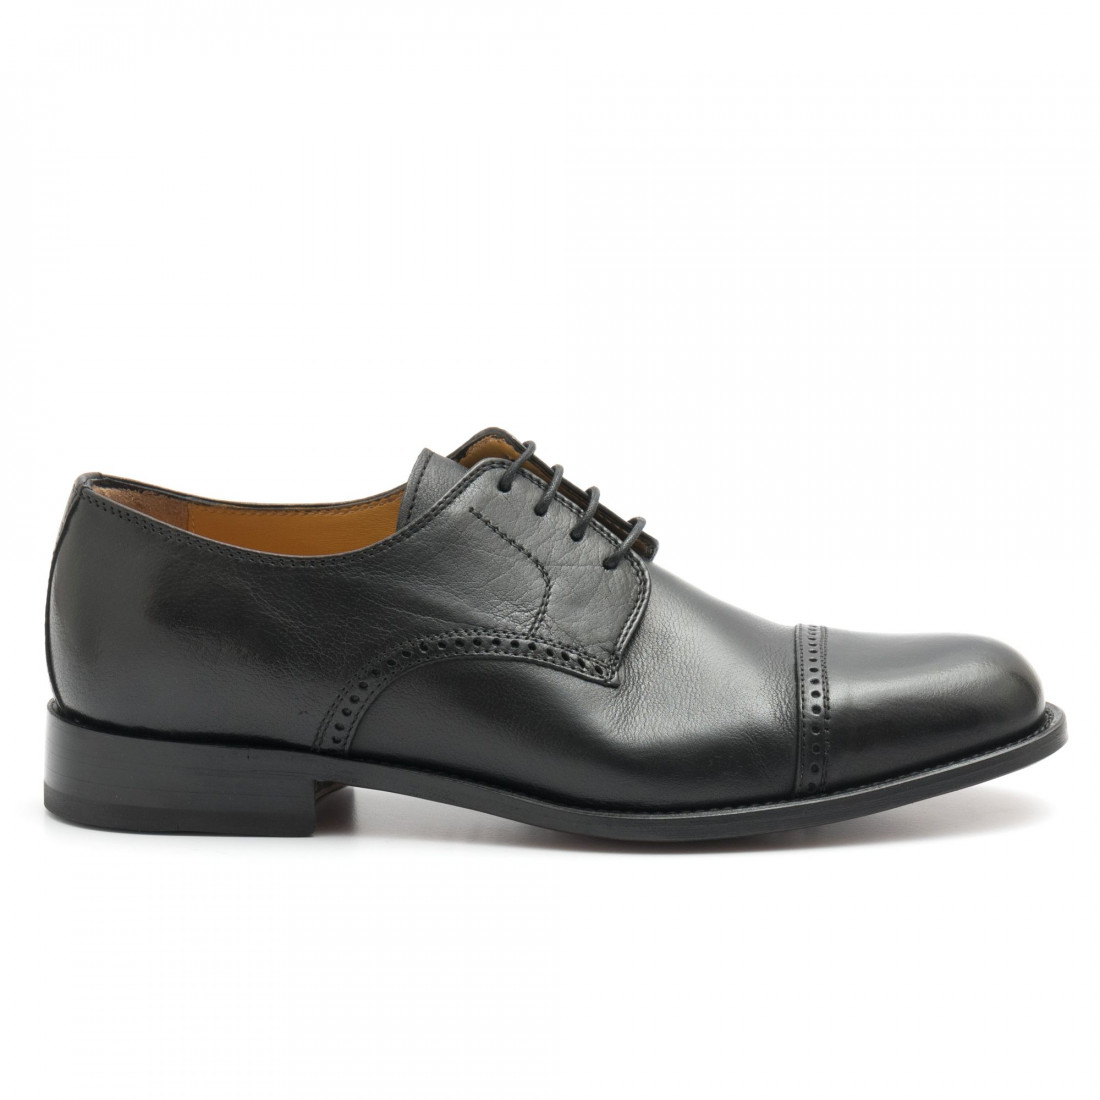 Black soft leather Calpierre derby shoes with footbed